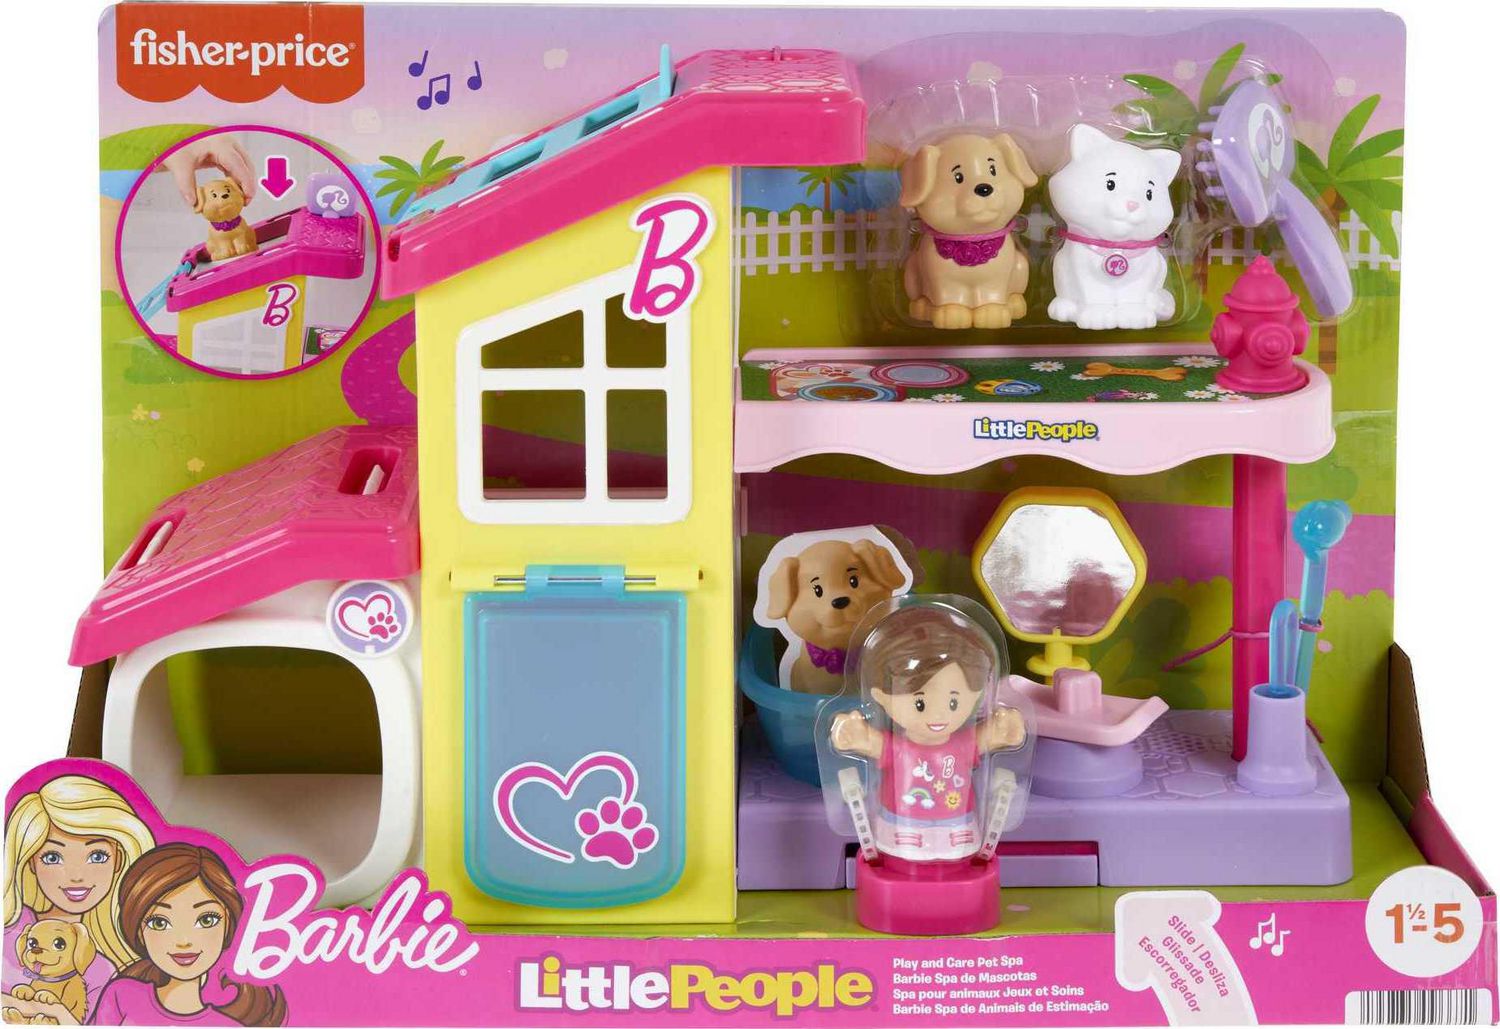 Little People Barbie Playset with Music and Sounds, Play and Care